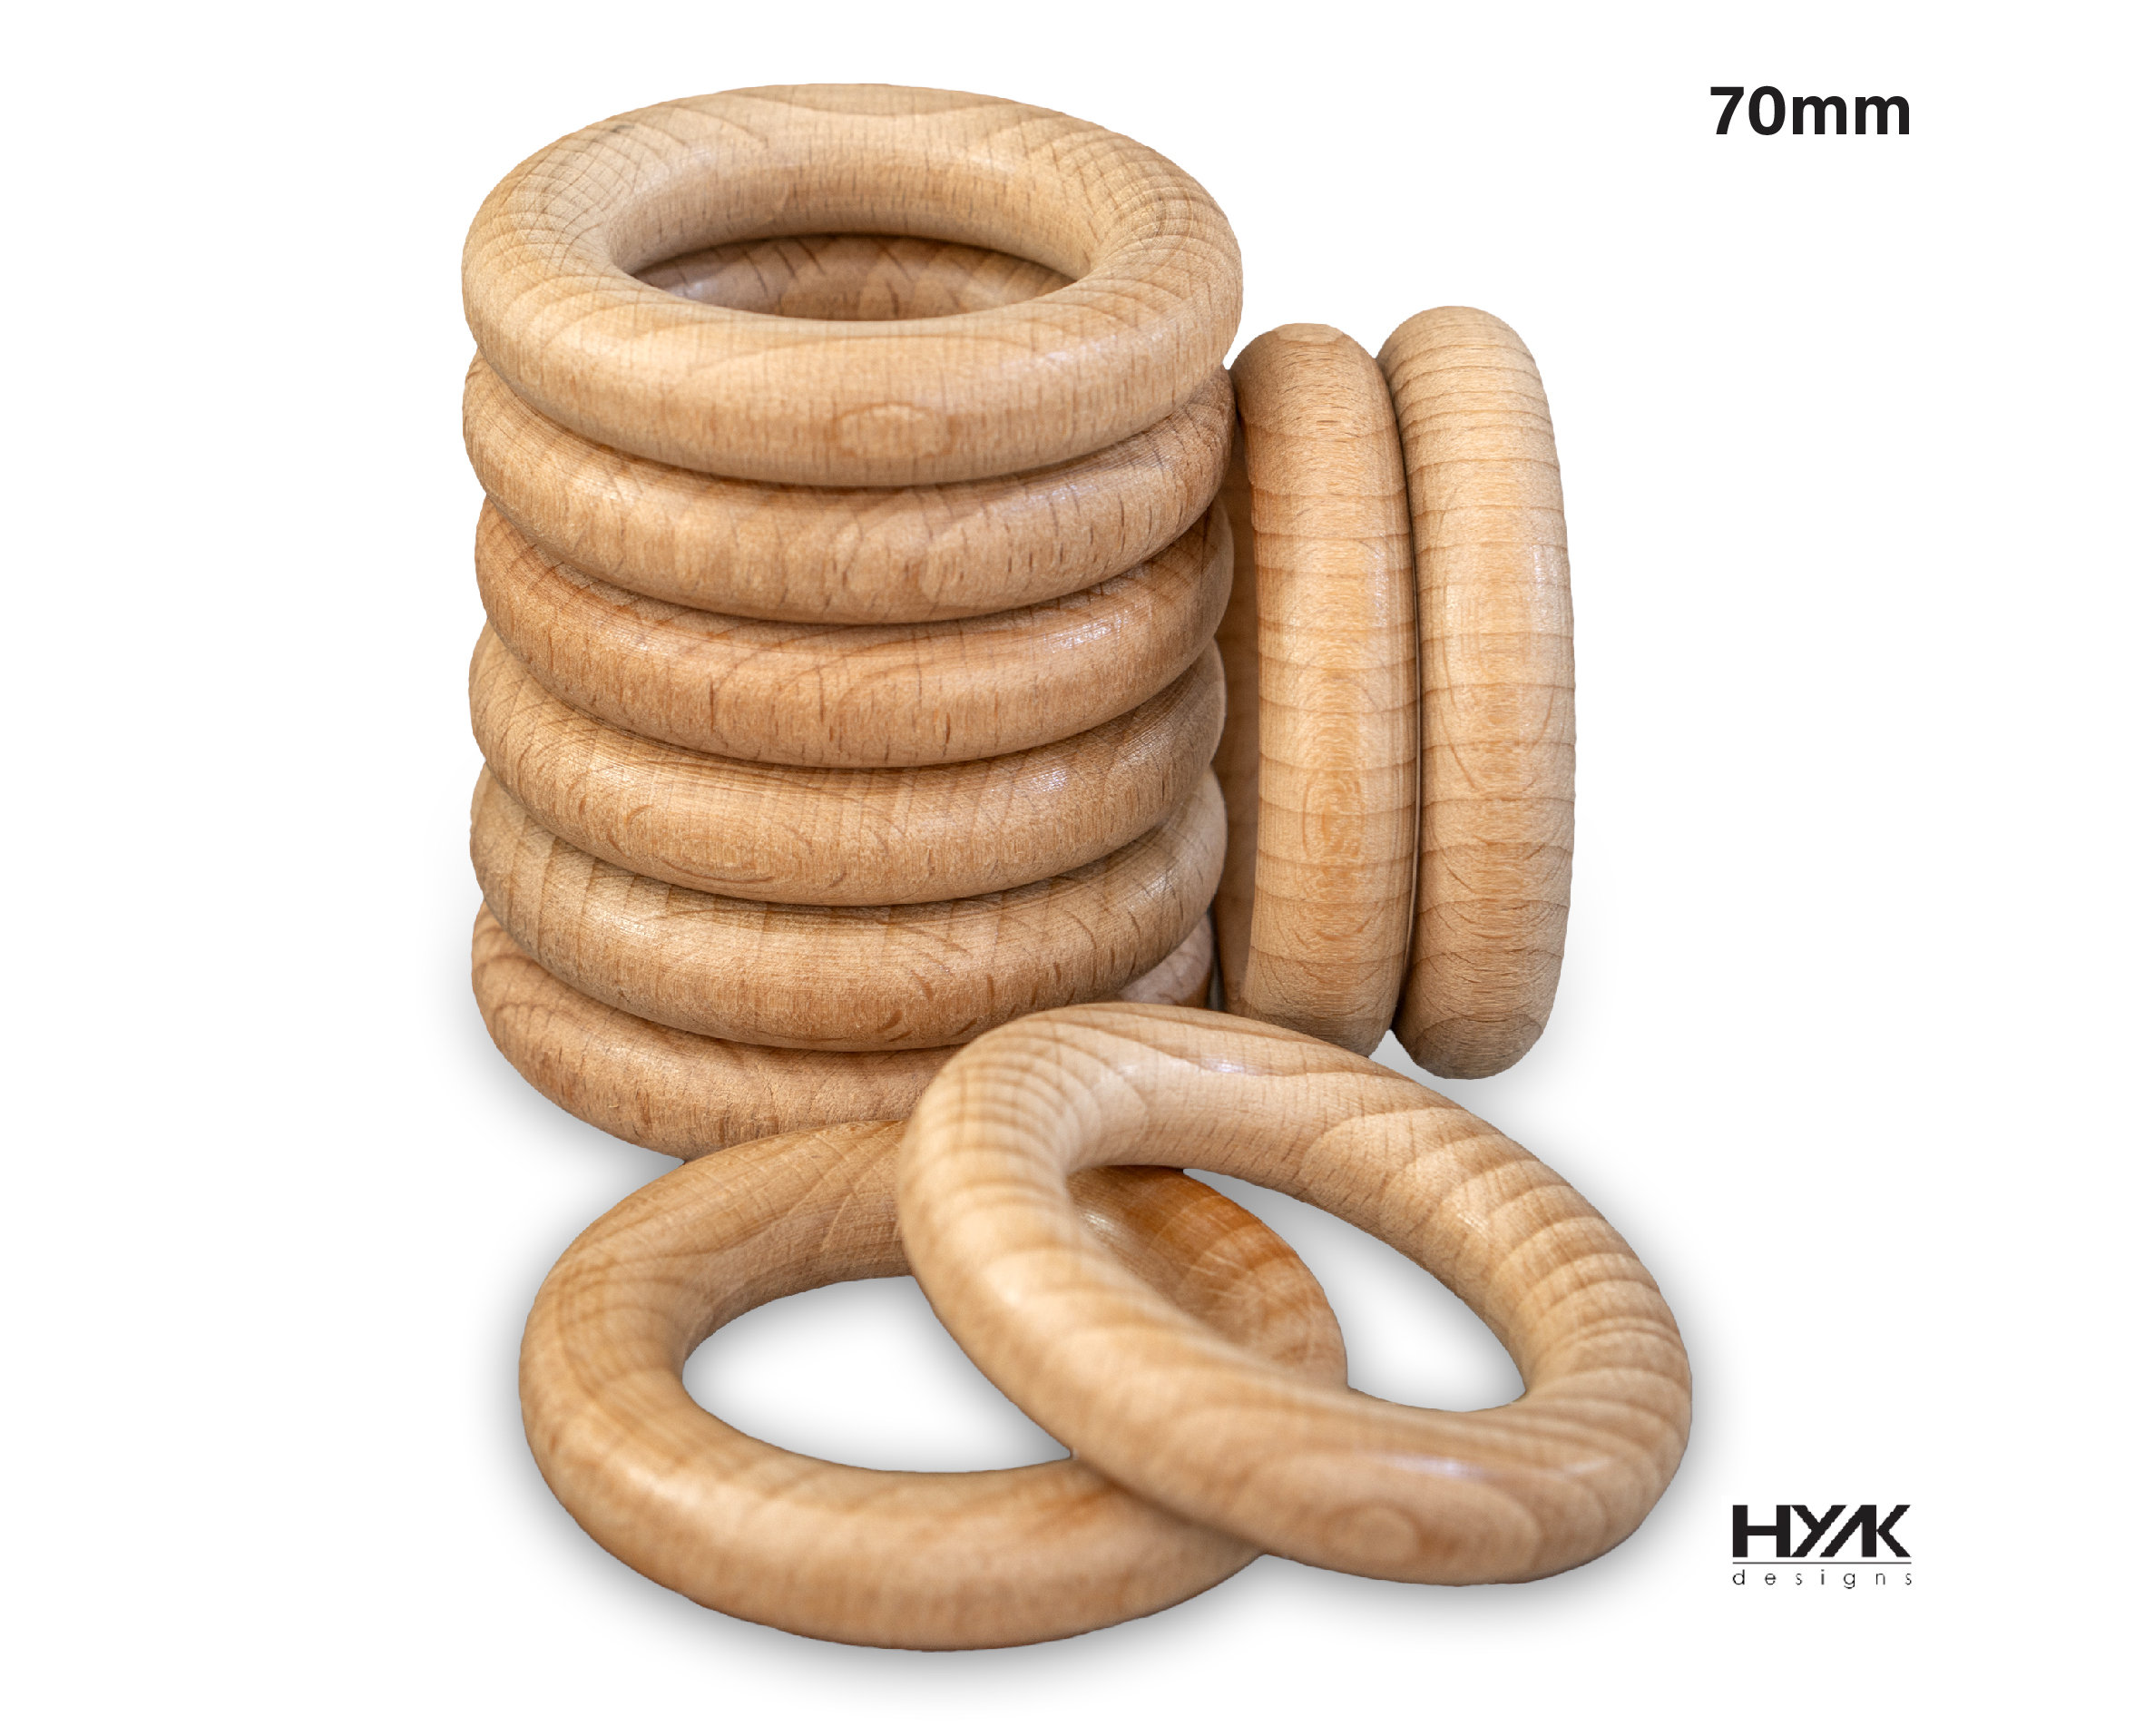 Solid Wooden Rings Natural Wood Rings for Macrame DIY Crafts Ornaments  Making